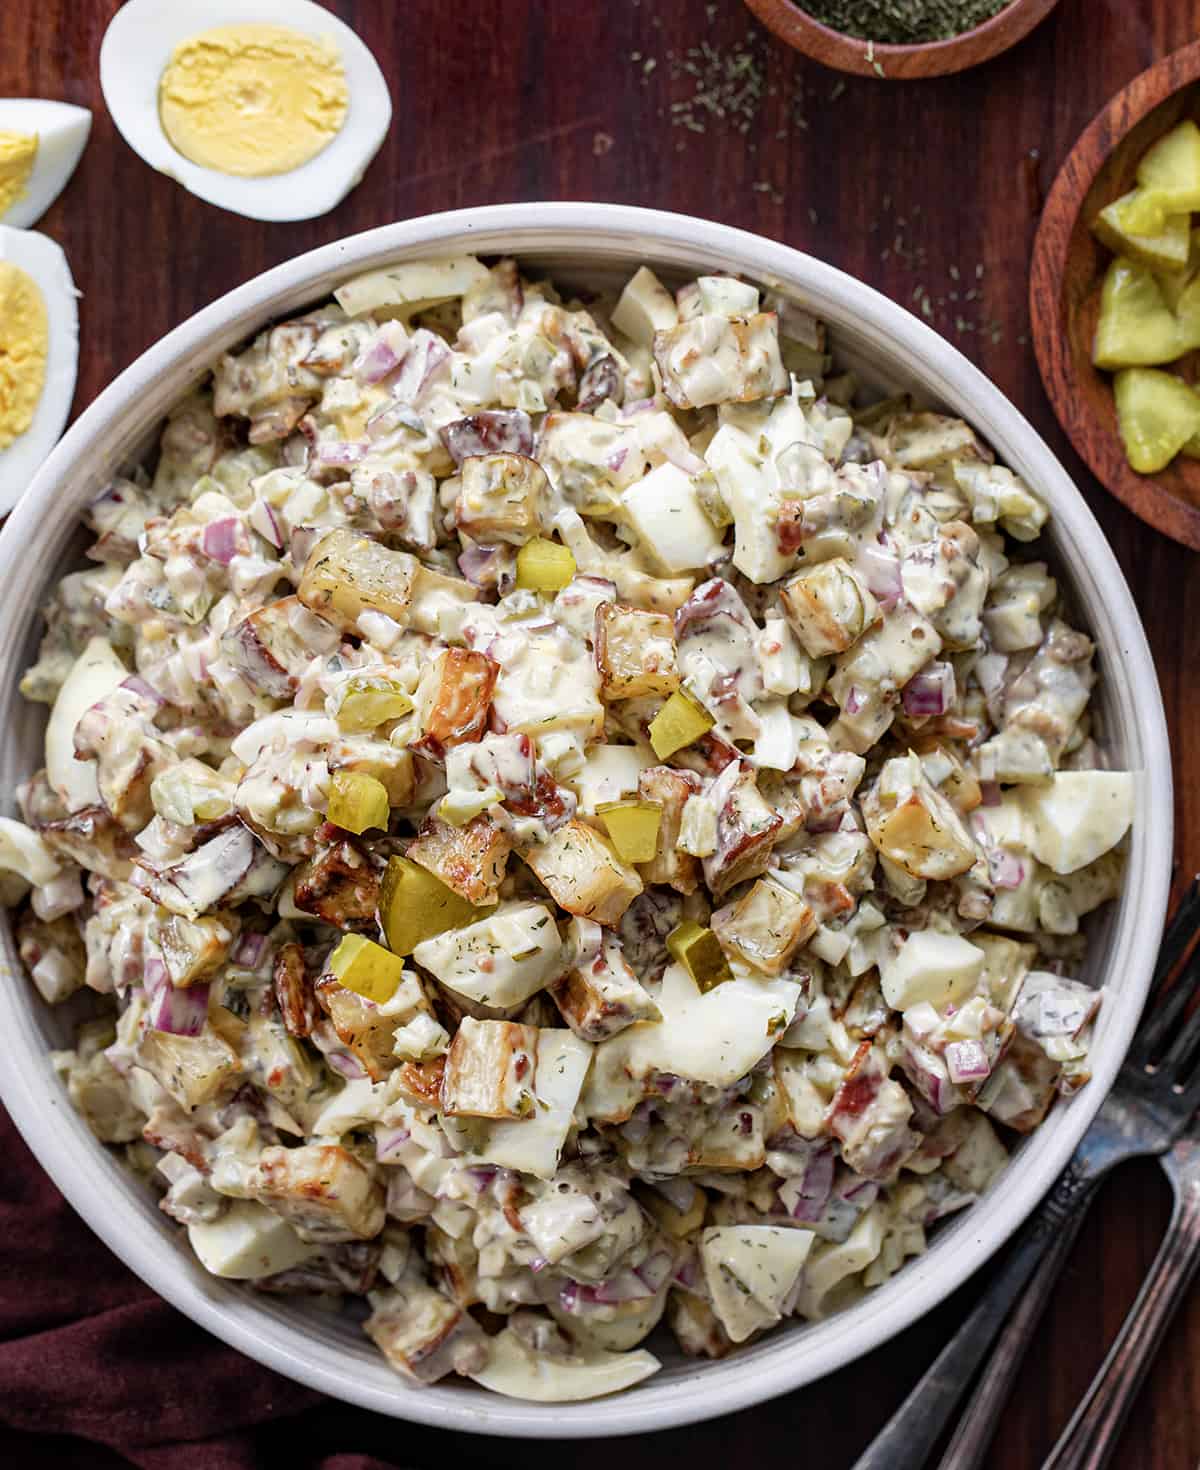 Big Bowl of Dill Pickle Roasted Potato Salad Next to Pickles and Cut up Eggs.